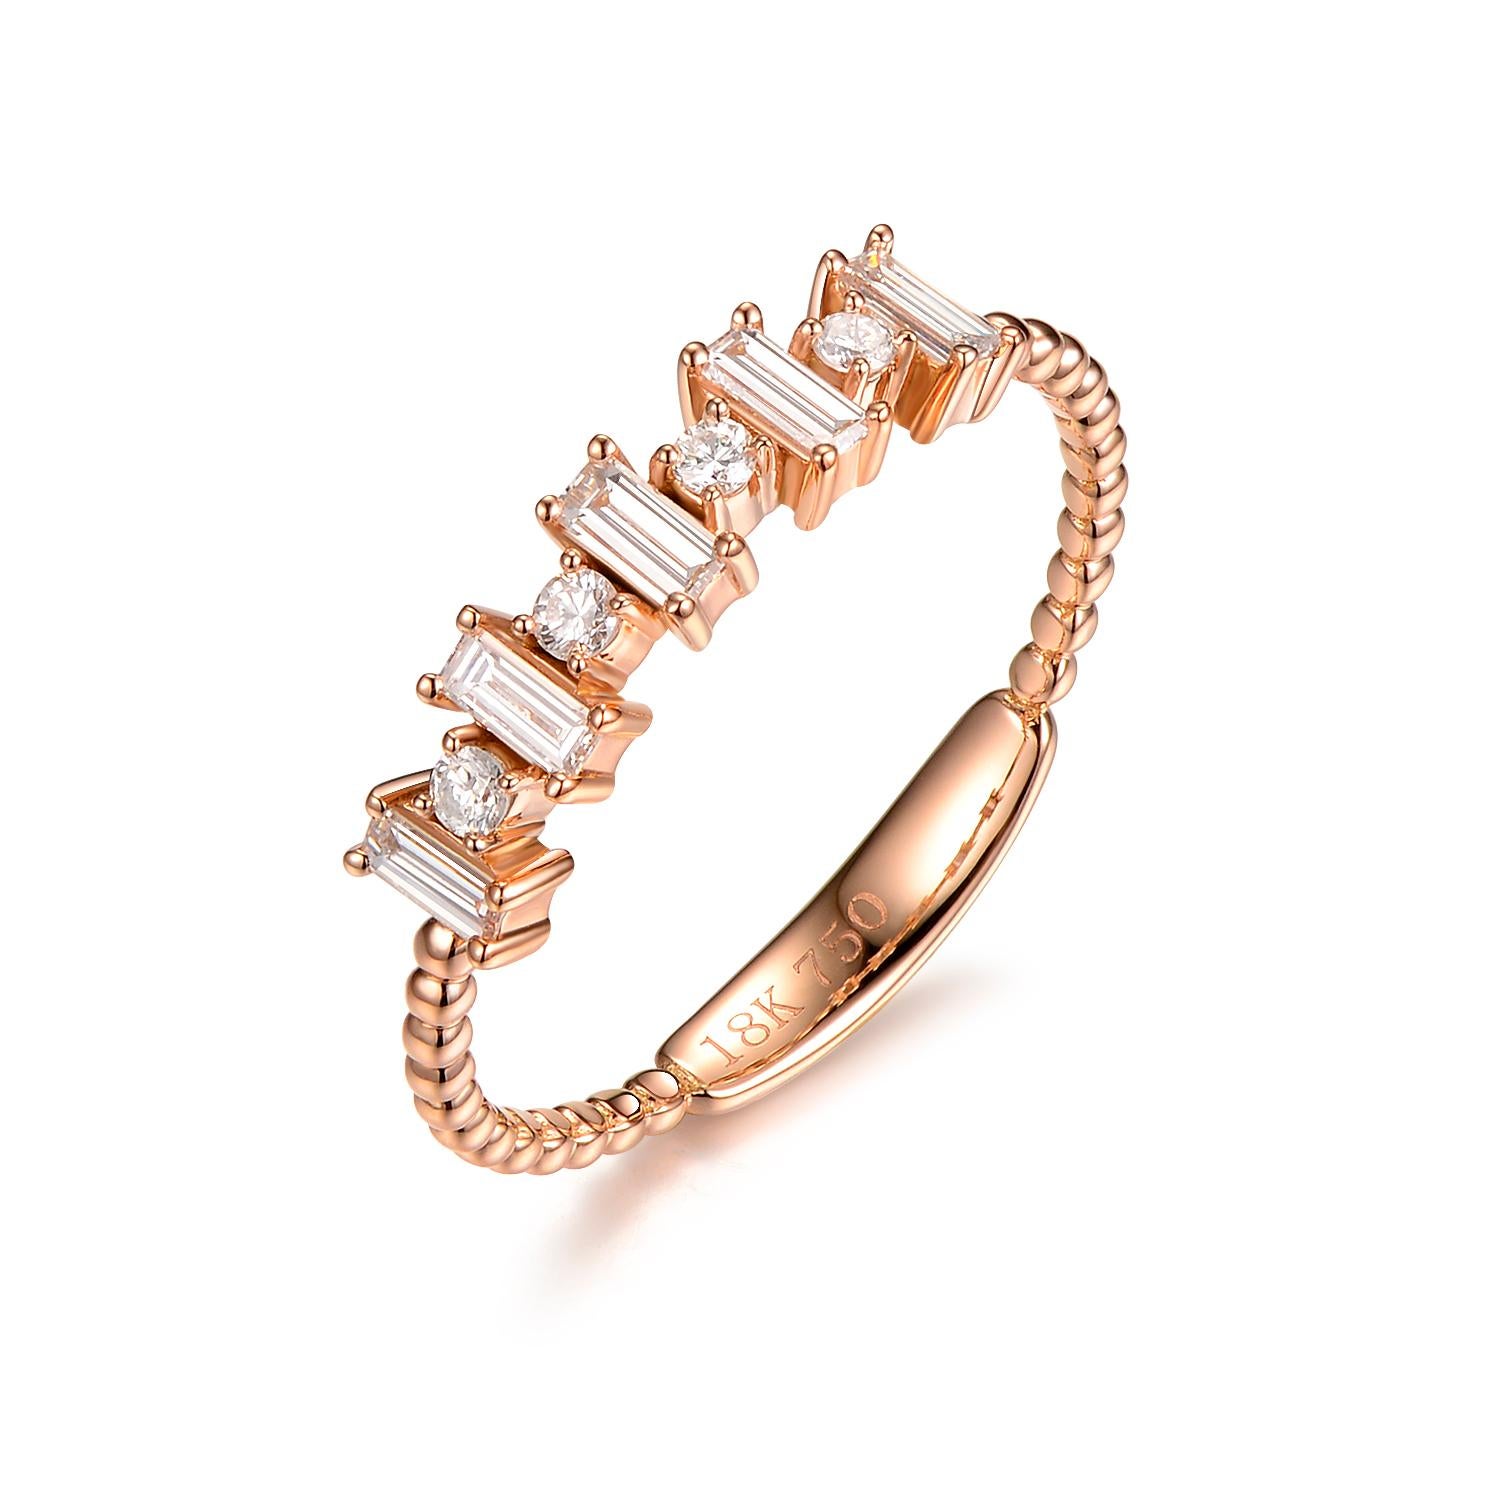 This dainty ring features 0.26 carat of taper diamonds and 0.12 carat of round diamond. Great for everyday use. It's also stack-able with other band rings. Diamonds are set in 18 karat rose gold

US 6.5 
Taper Diamond 0.26 carat
Round Diamond 0.12